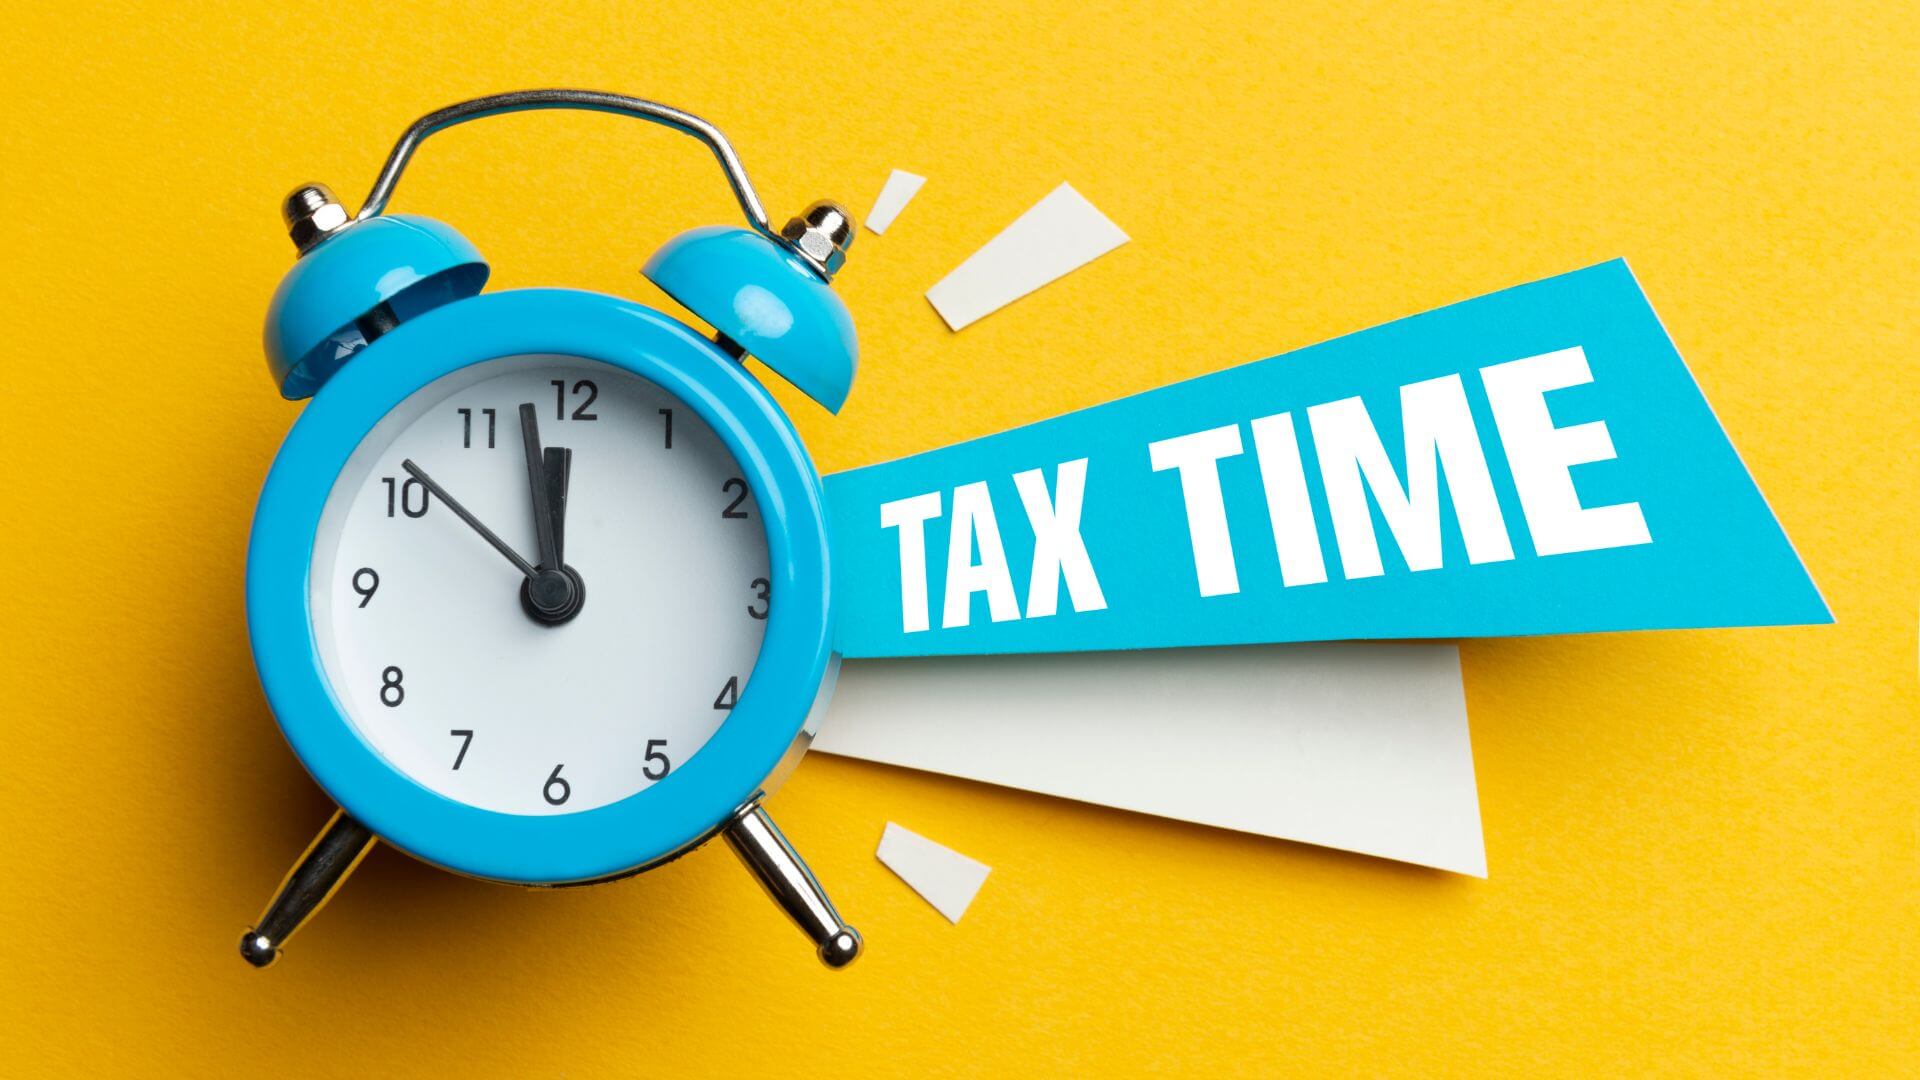 Blue alarm clock with the words 'TAX TIME' on a bright yellow background, symbolizing the urgency and importance of preparing for tax season.